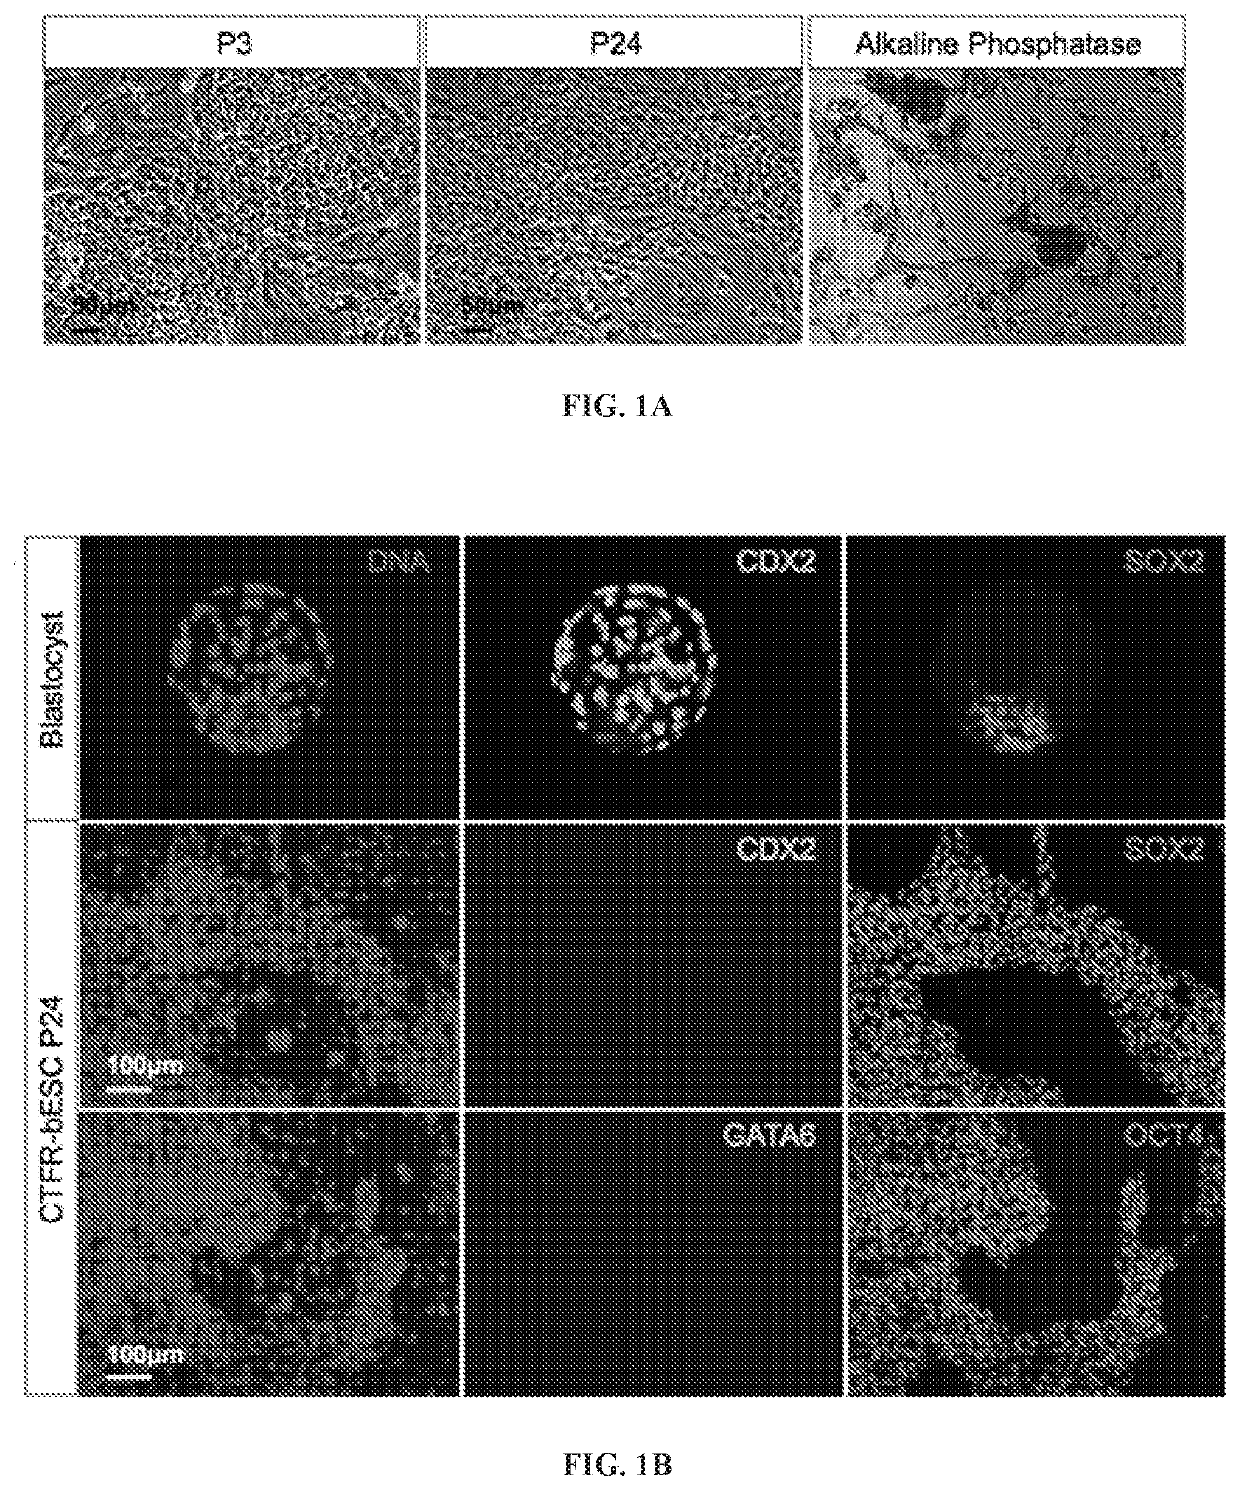 Efficient derivation of stable pluripotent bovine embryonic stem cells